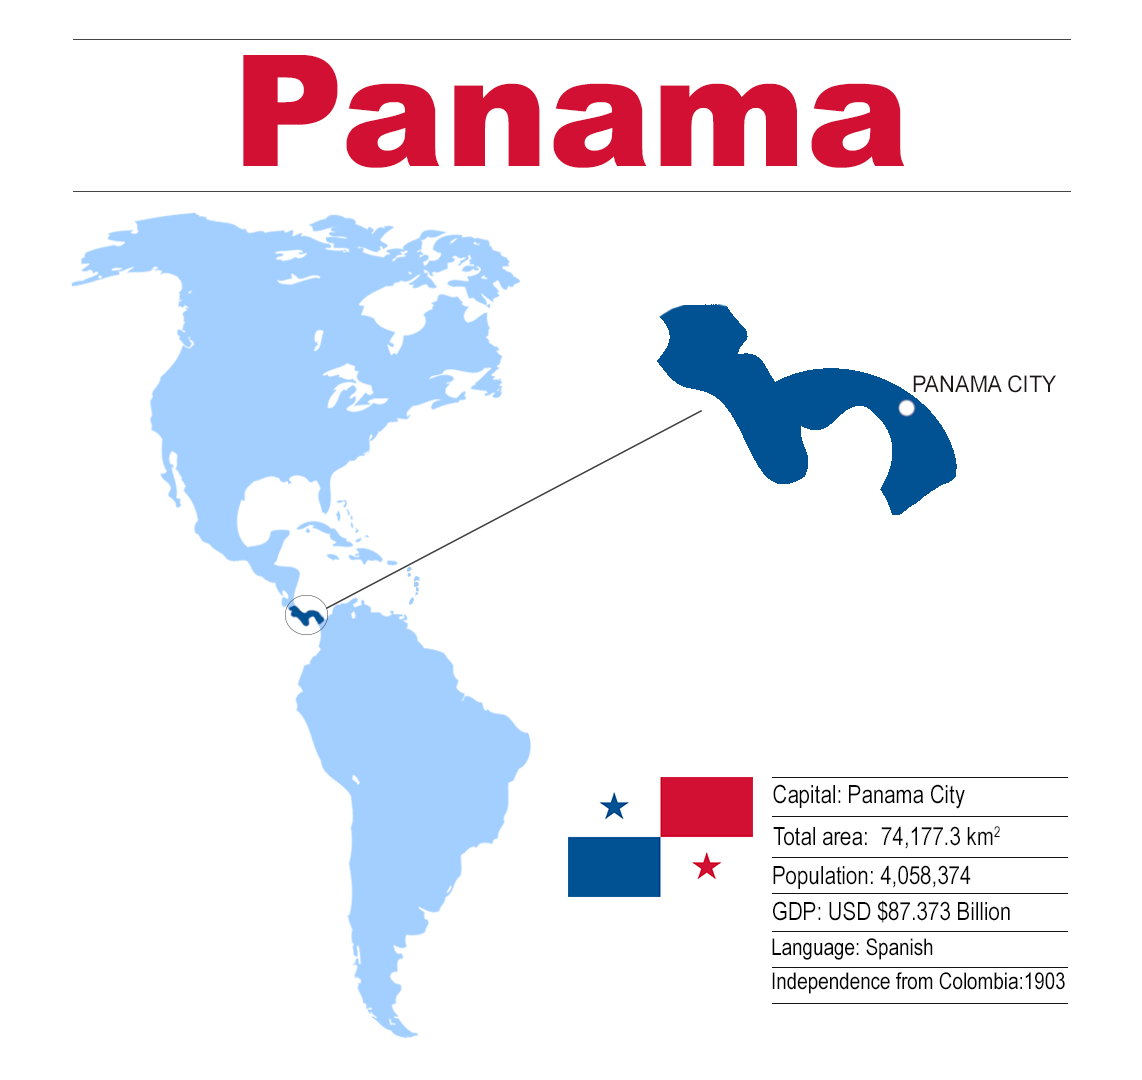 How can I obtain a Panamanian passport